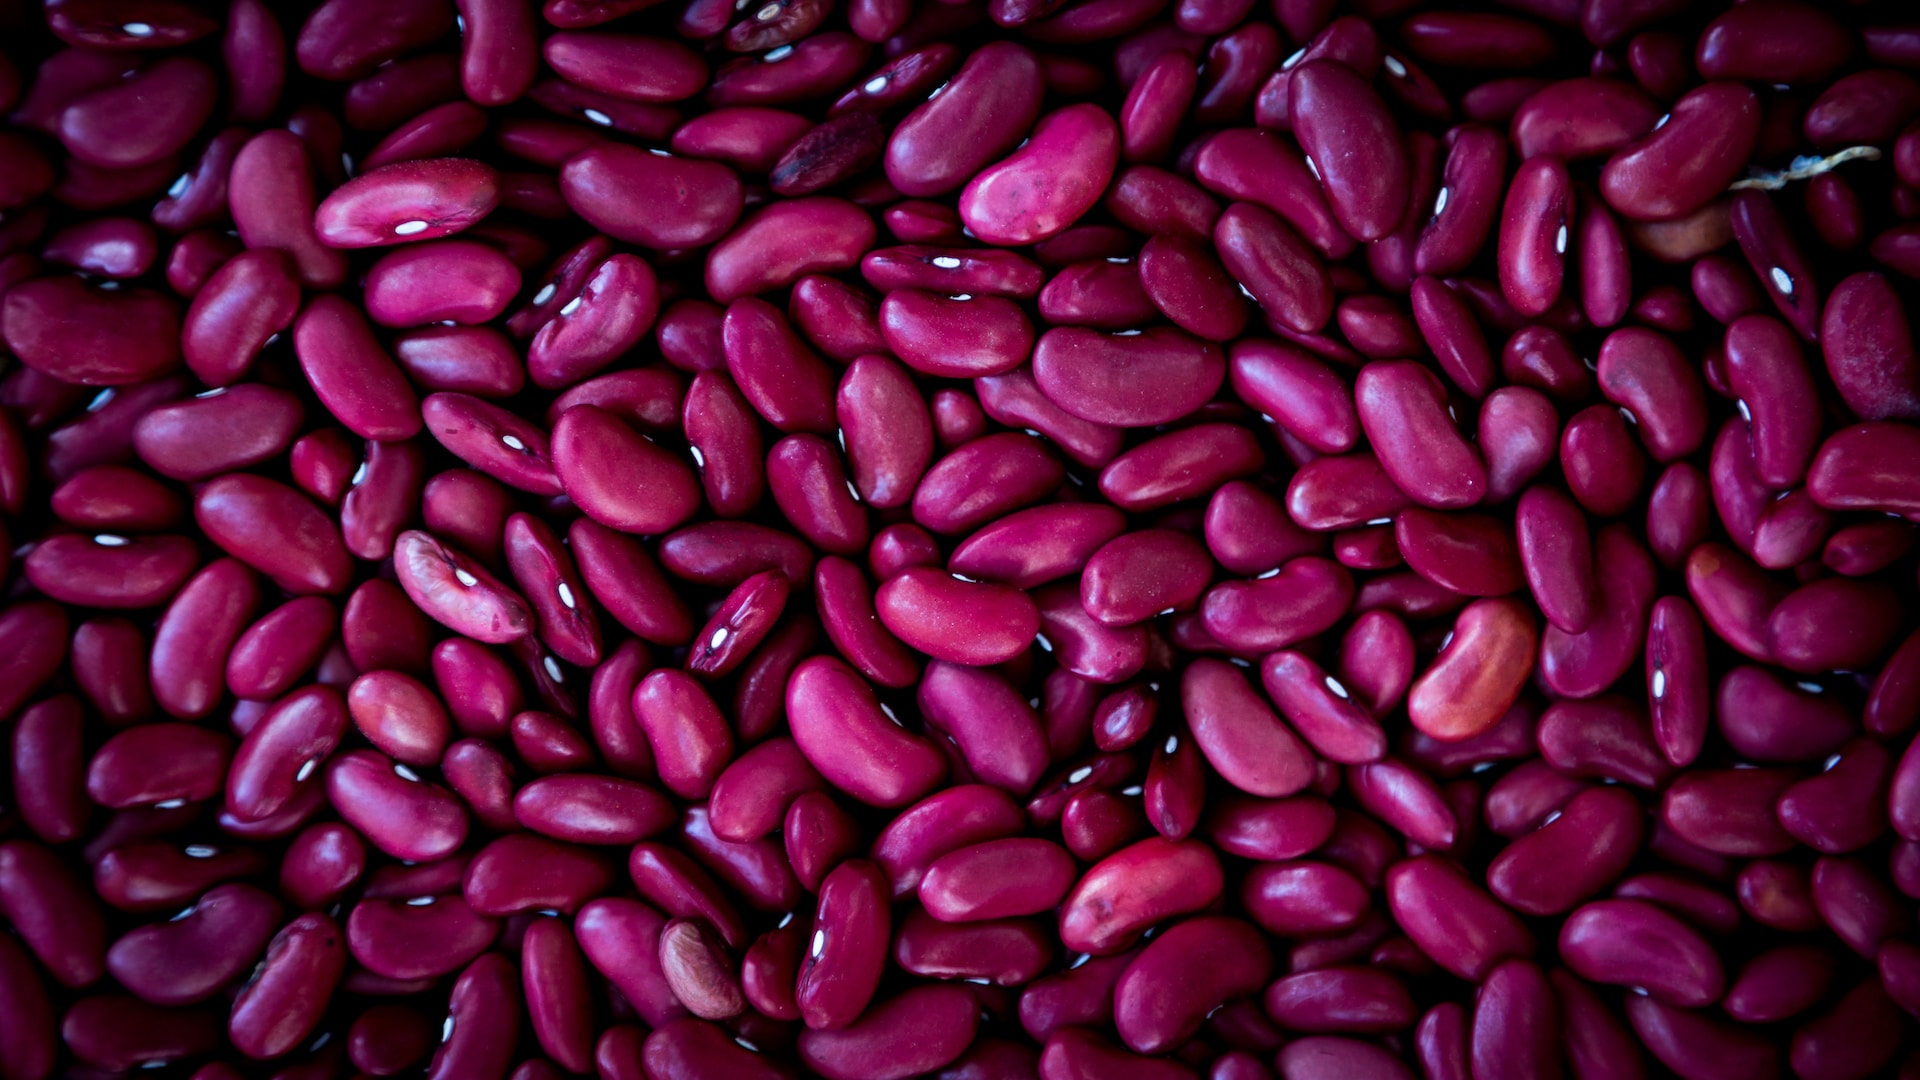 19-facts-about-kidney-beans